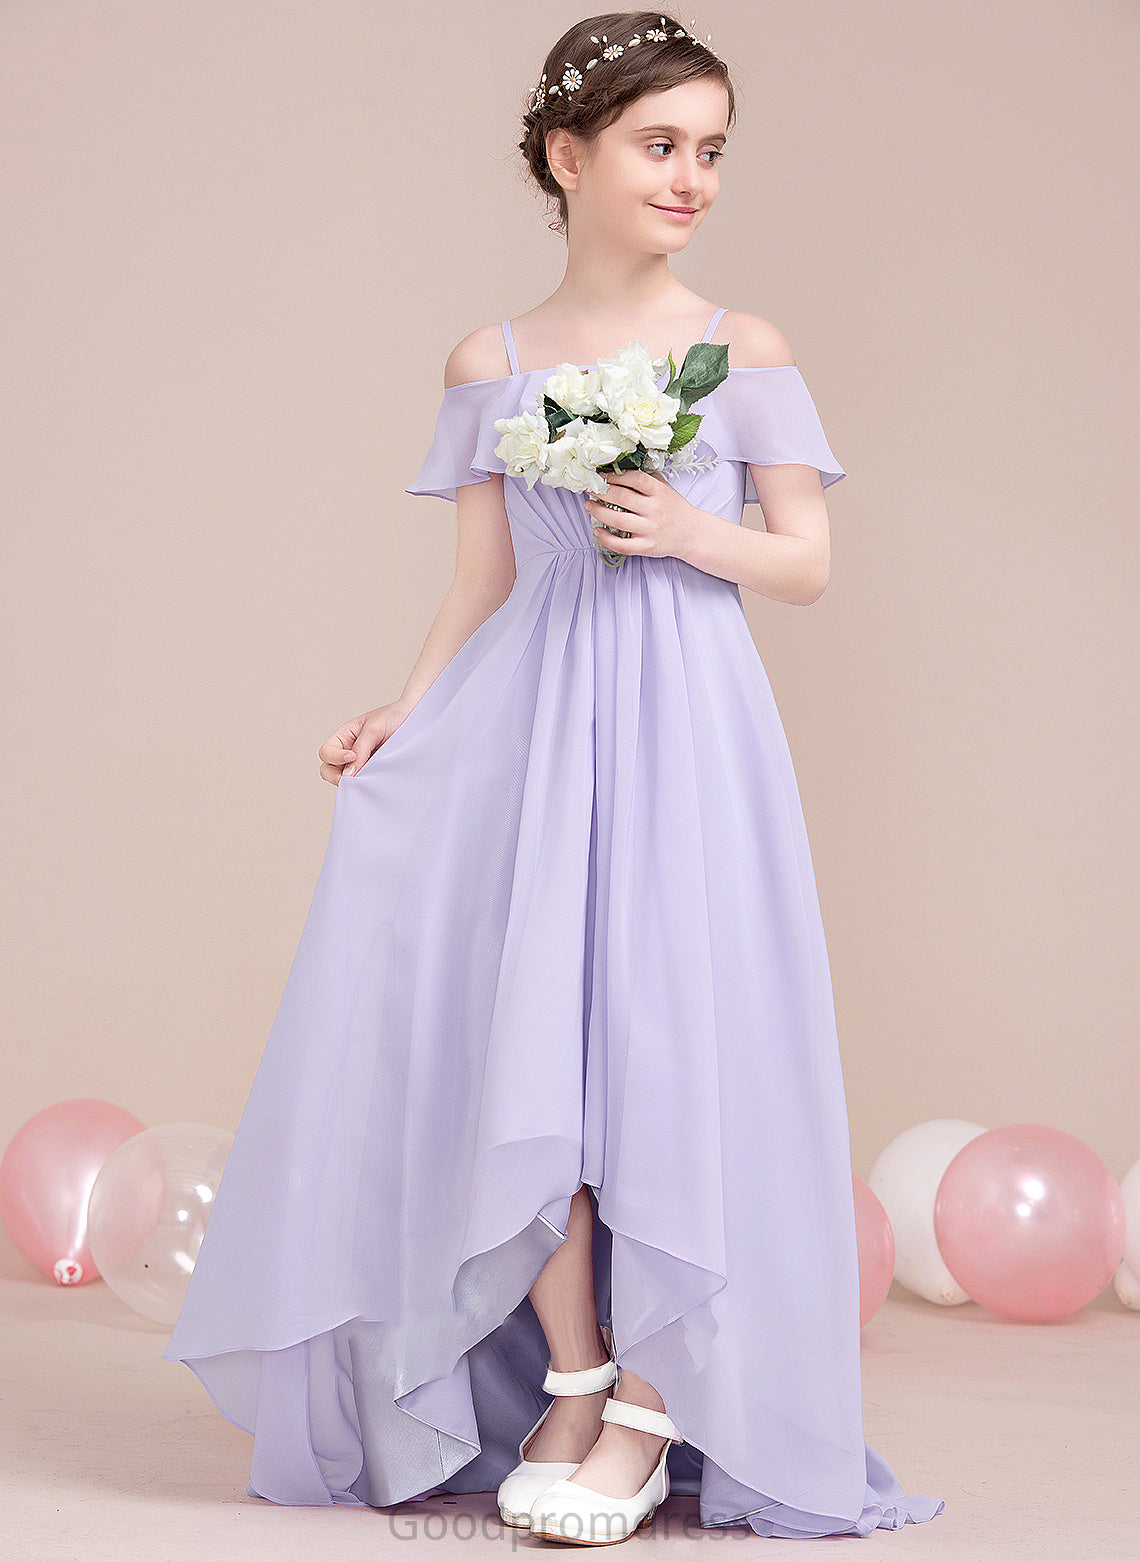 Ruffles Asymmetrical Karlee Junior Bridesmaid Dresses Off-the-Shoulder With A-Line Chiffon Cascading